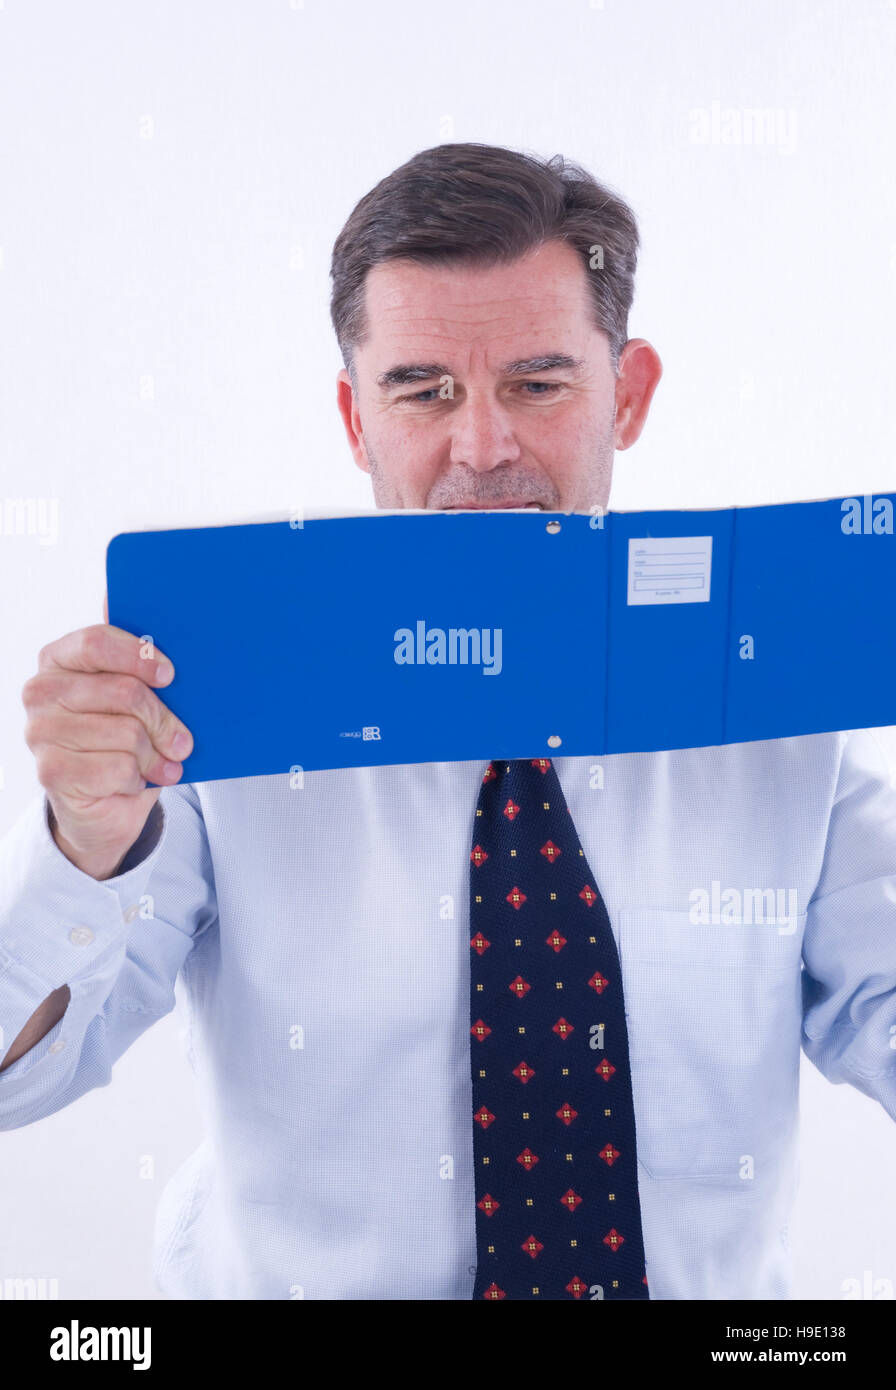 Businessman, over 50, with bank receipts Stock Photo